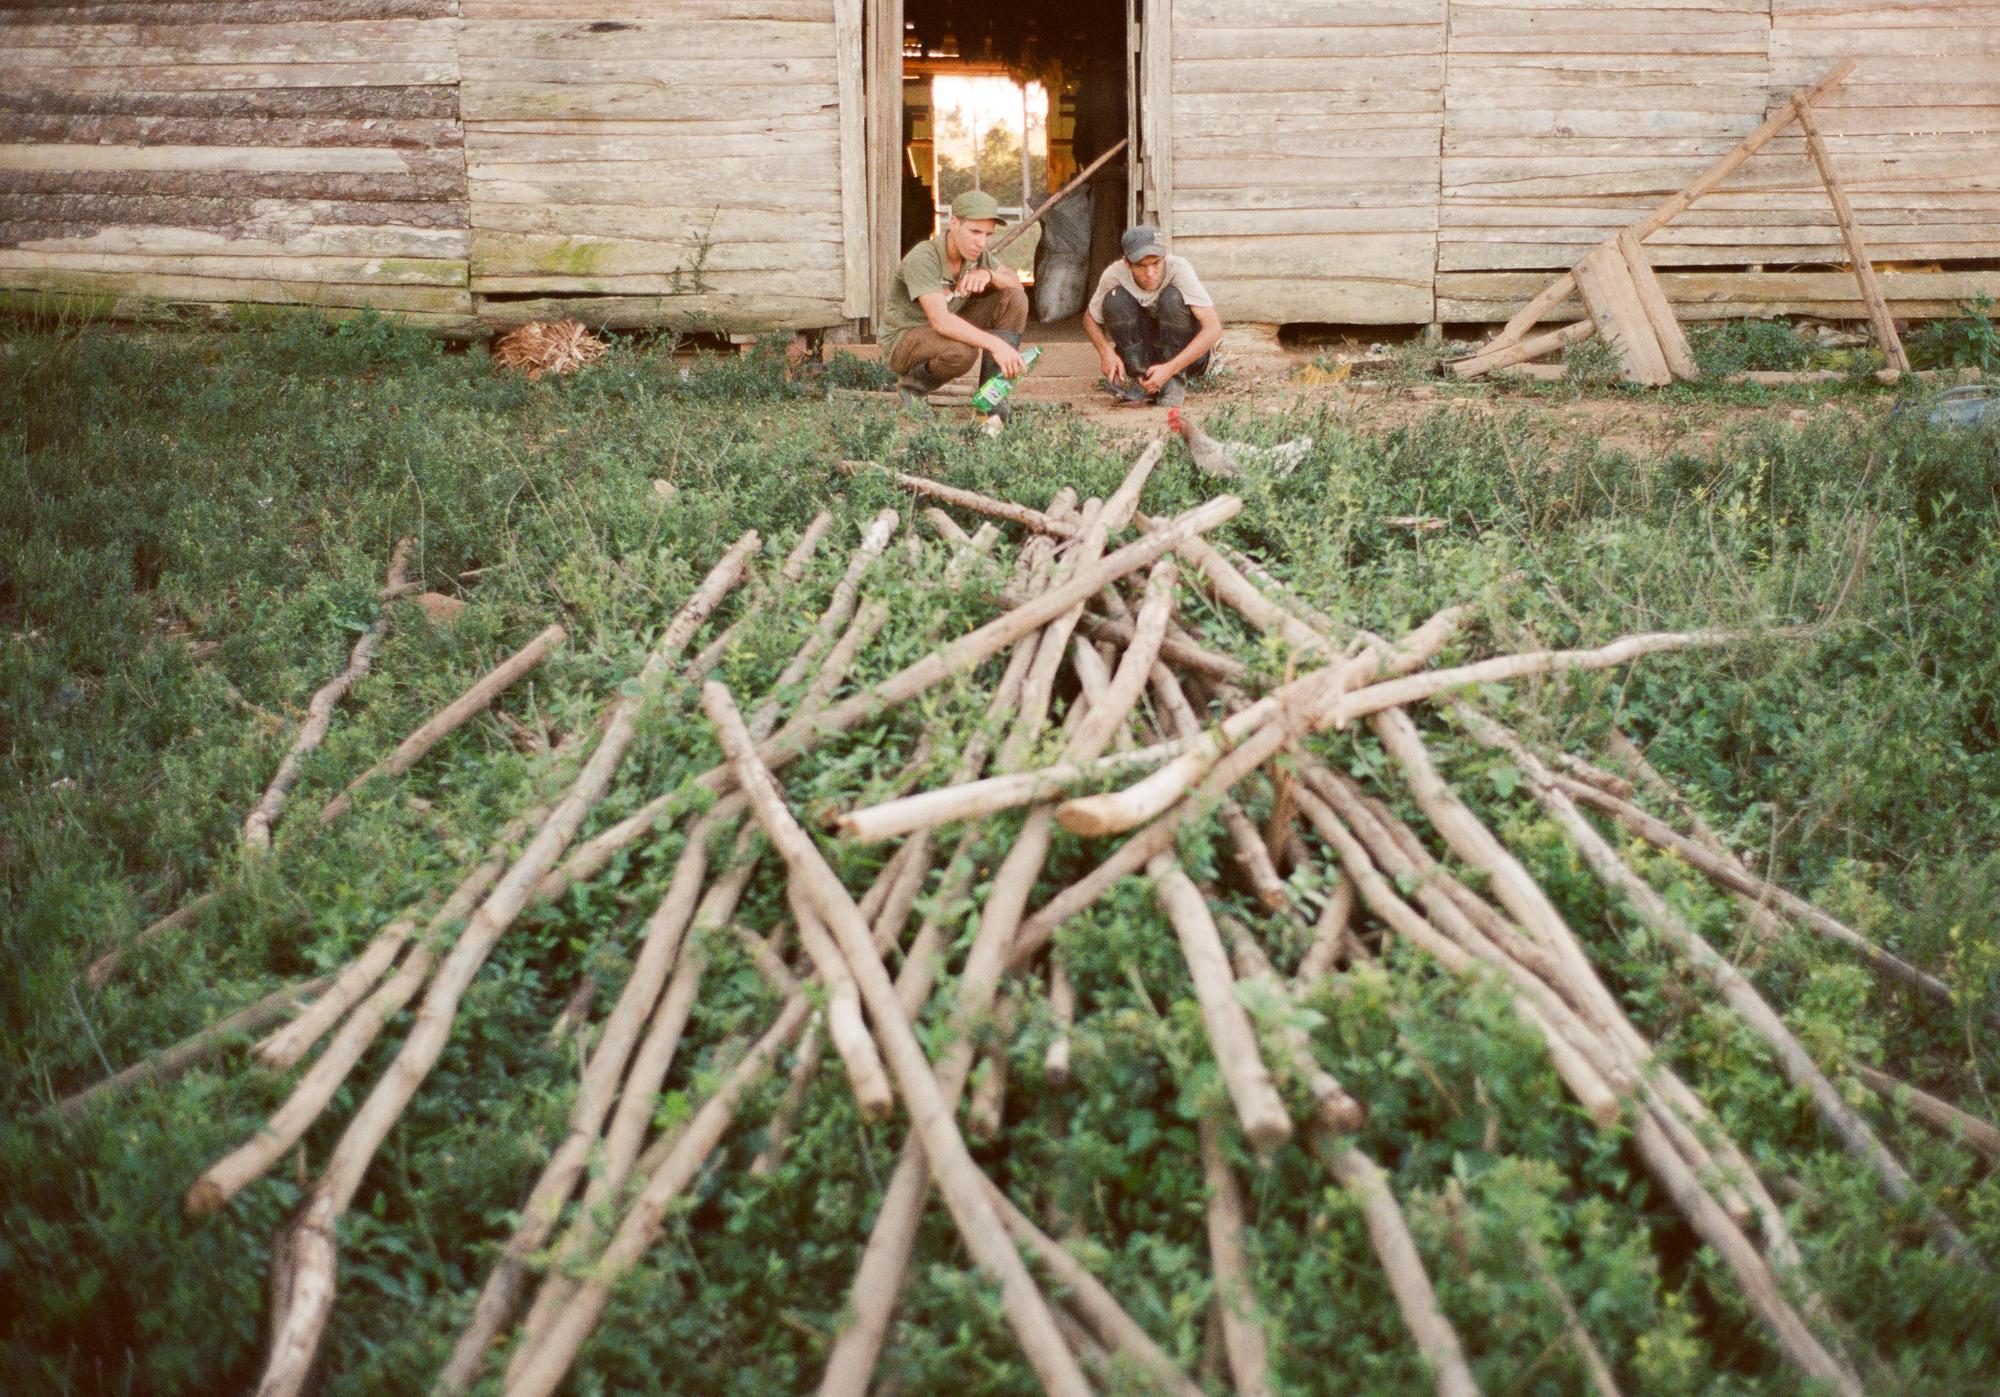 VI&Ntilde;ALES. Two teenage farmers, Richer and Osmani, fix a sticky set of pliers with oil on the Casa del Veguero farm. The wooden beams in the foreground are used to hang future sewn lines of tobacco leaves to dry on within the secadero.